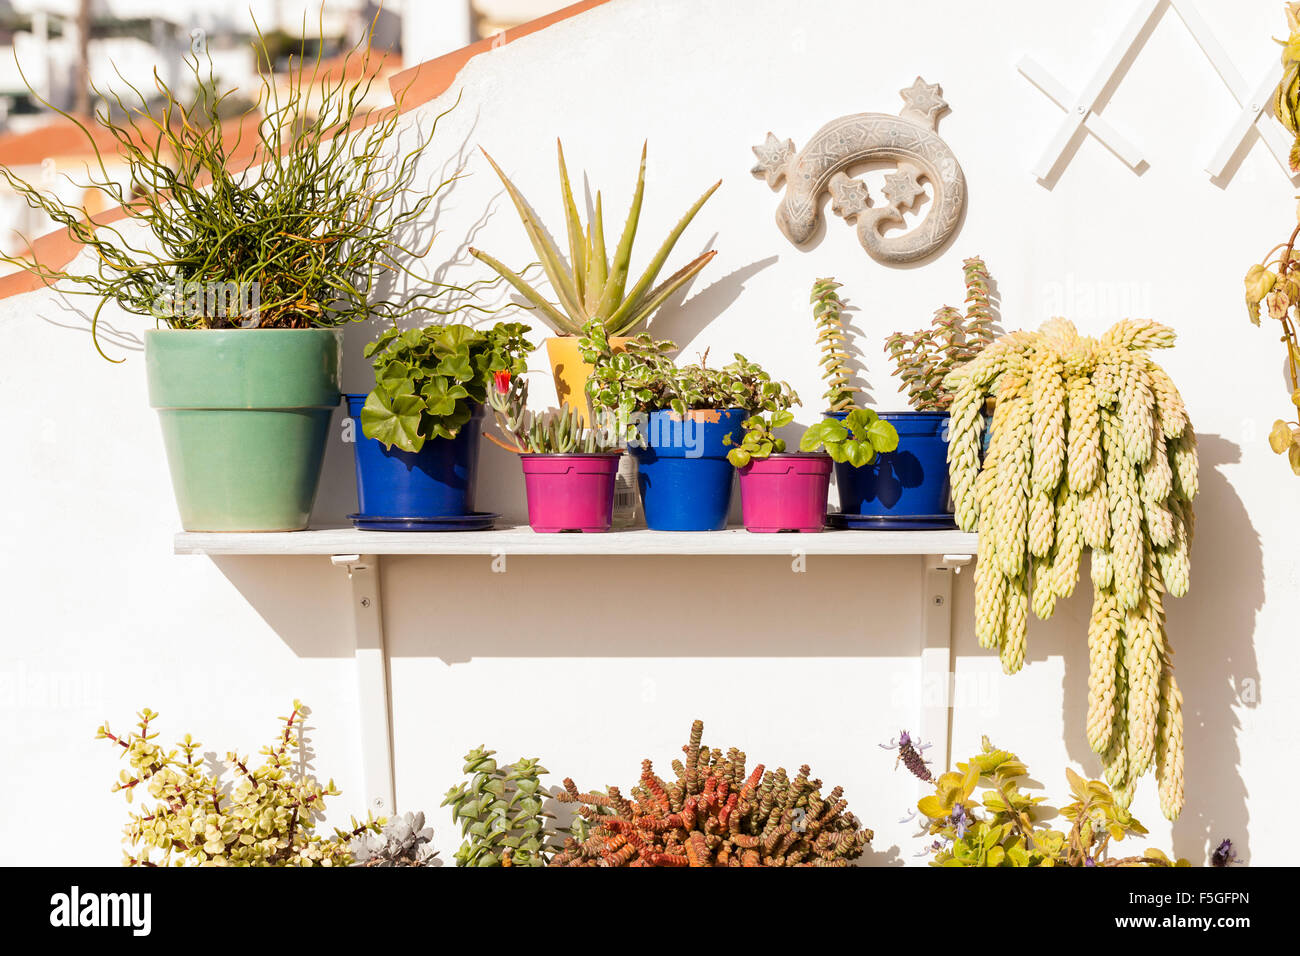 Terrace garden with succulents, cactus and other sub tropical plants on shelving in Playa de Las Americas, Tenerife, Canary Isla Stock Photo